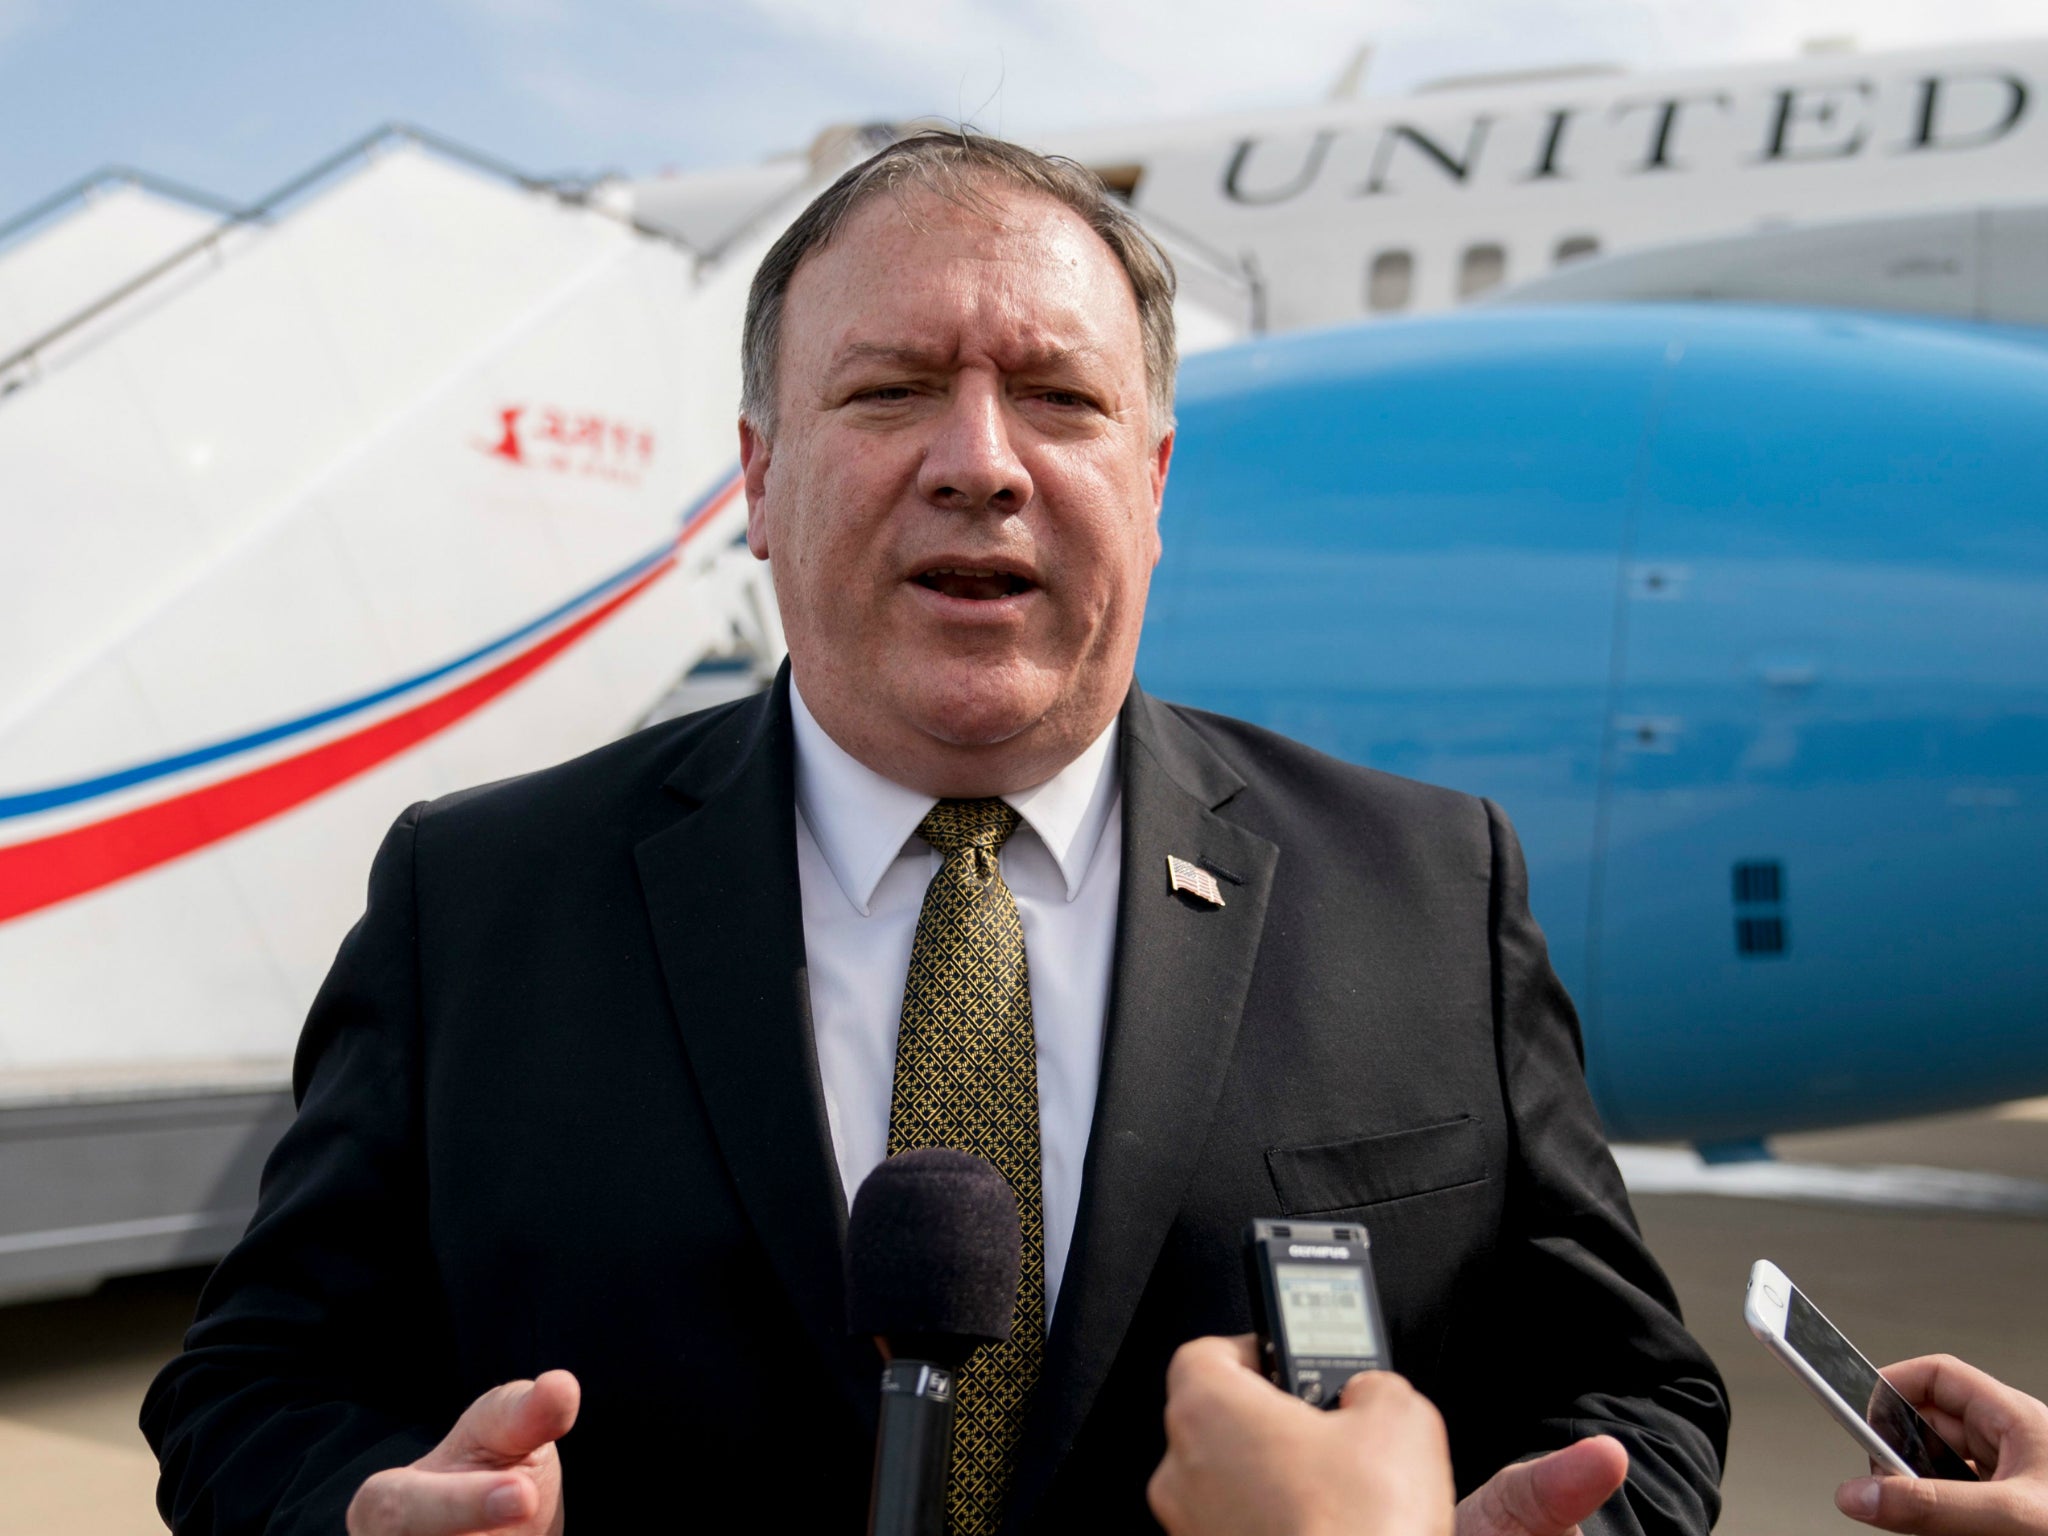 Mike Pompeo made the comments at a press conference at the United Nations in New York